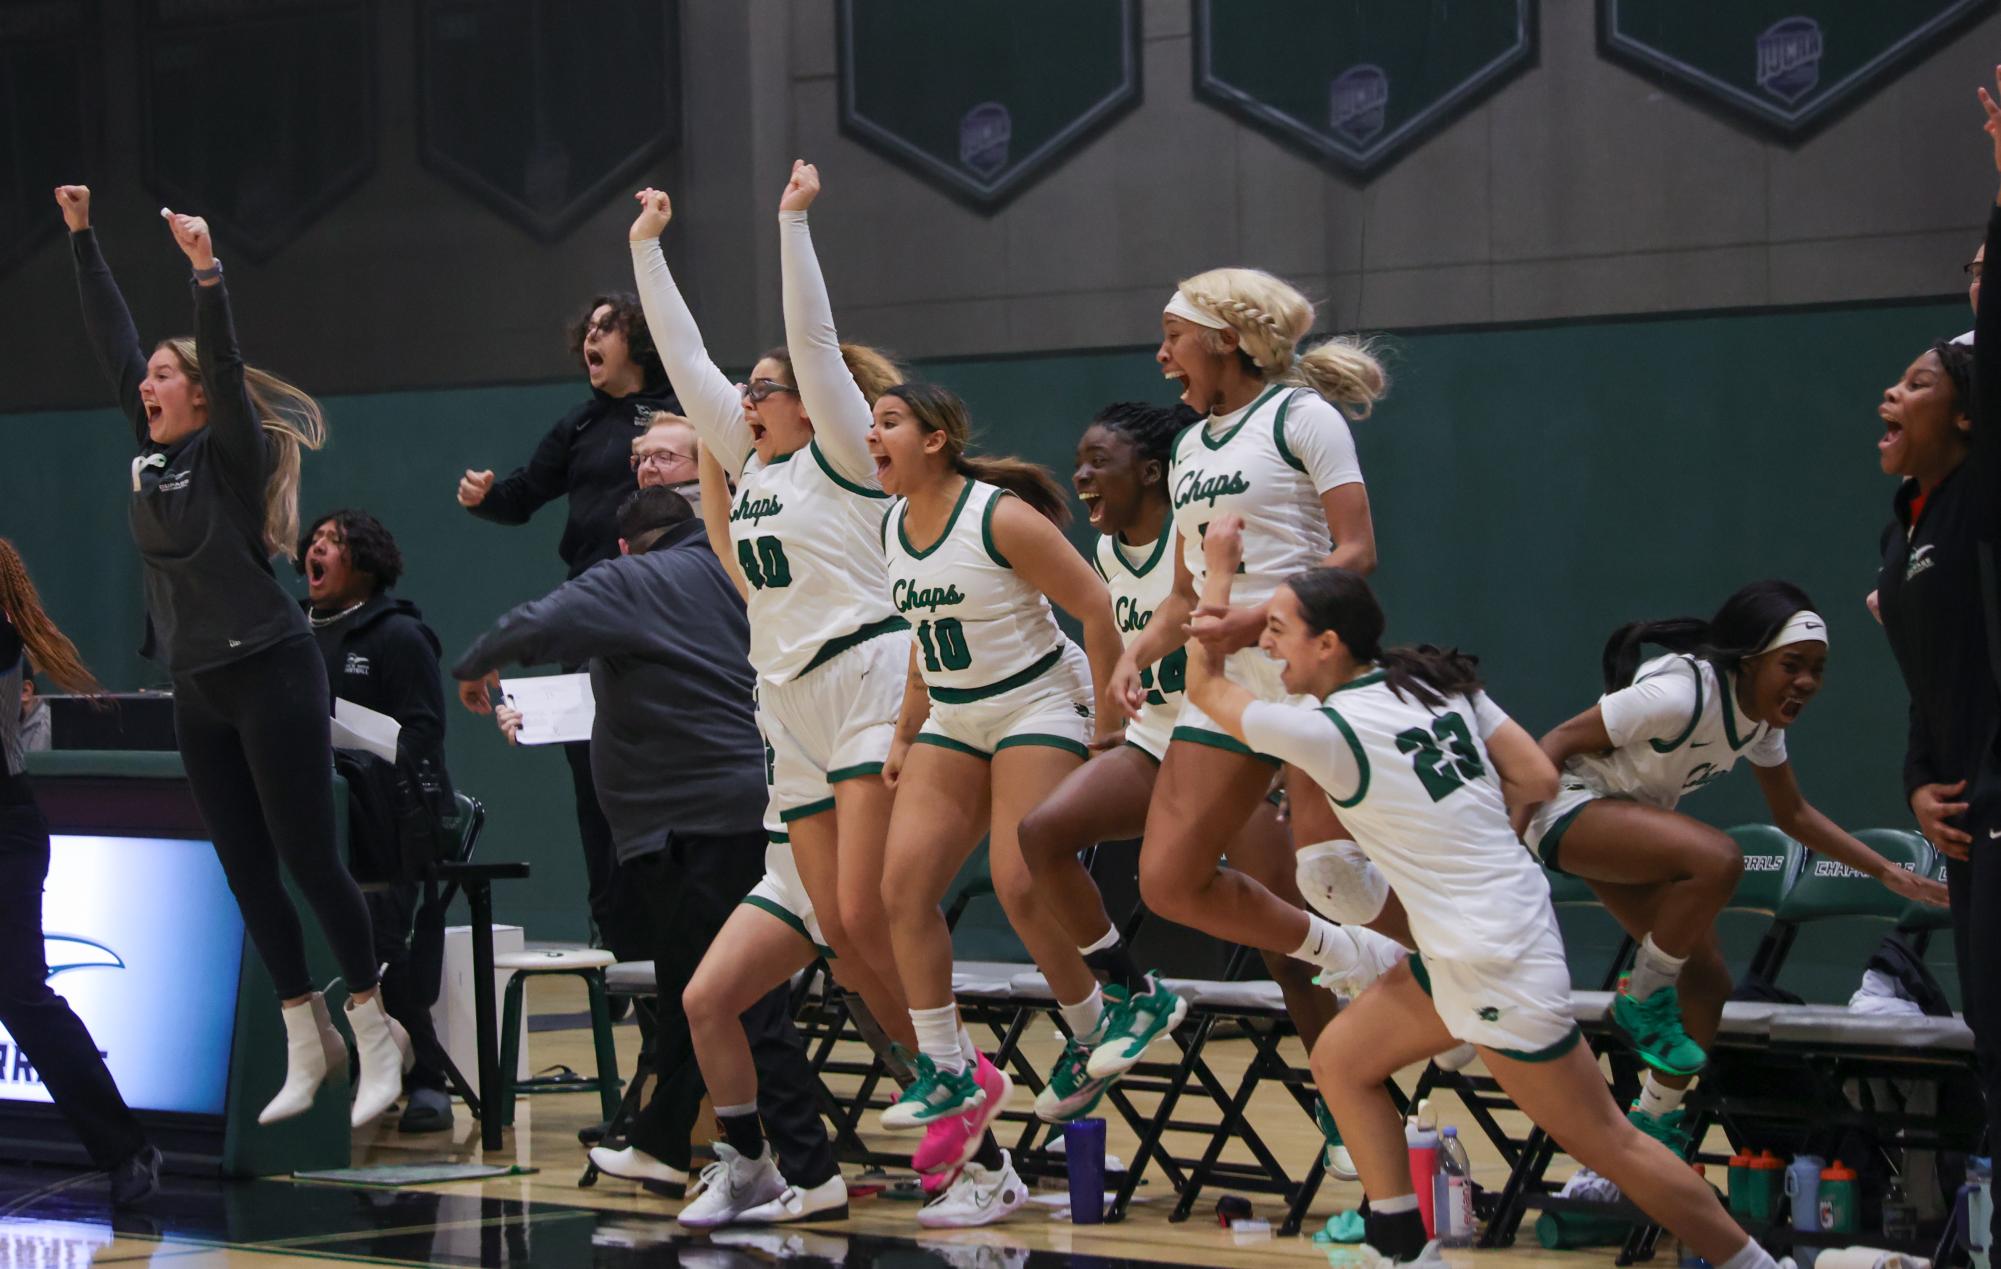 Topps' buzzer-beater lifts COD past Lake County - College of DuPage